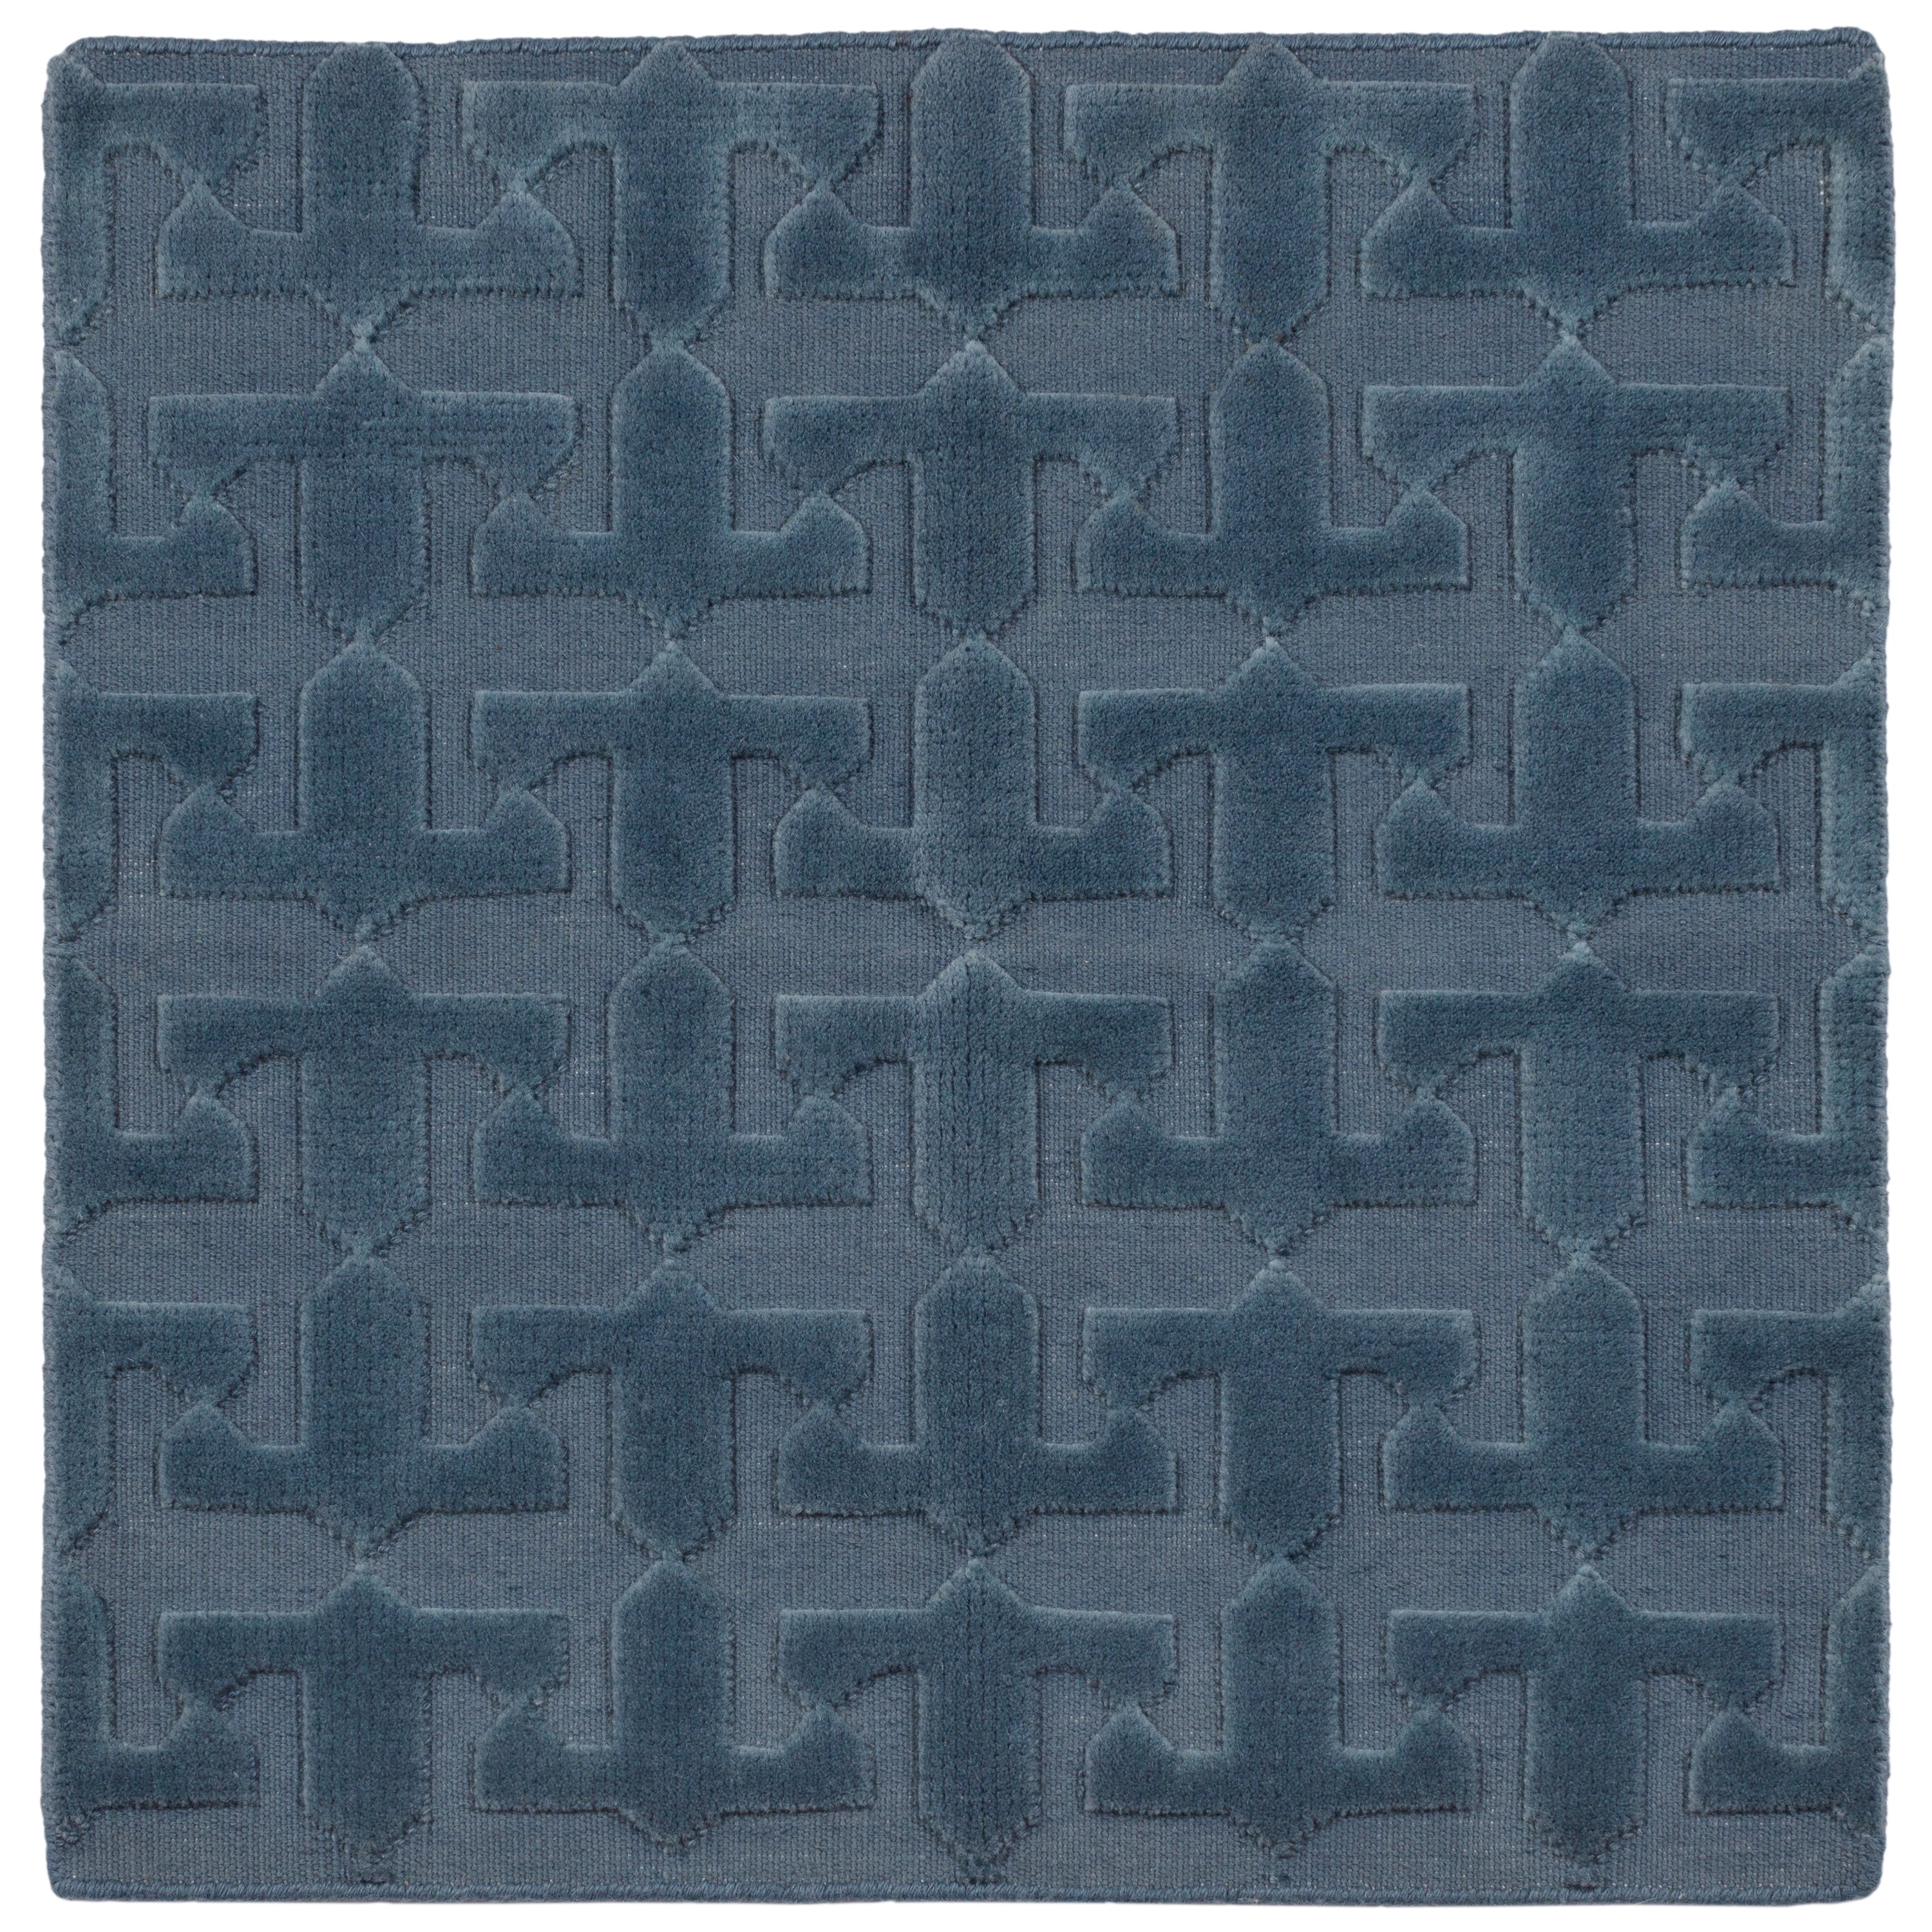 Detail of the Rug in Stormy Sky, a textural monochromatic abstract geometric pattern in blue. 